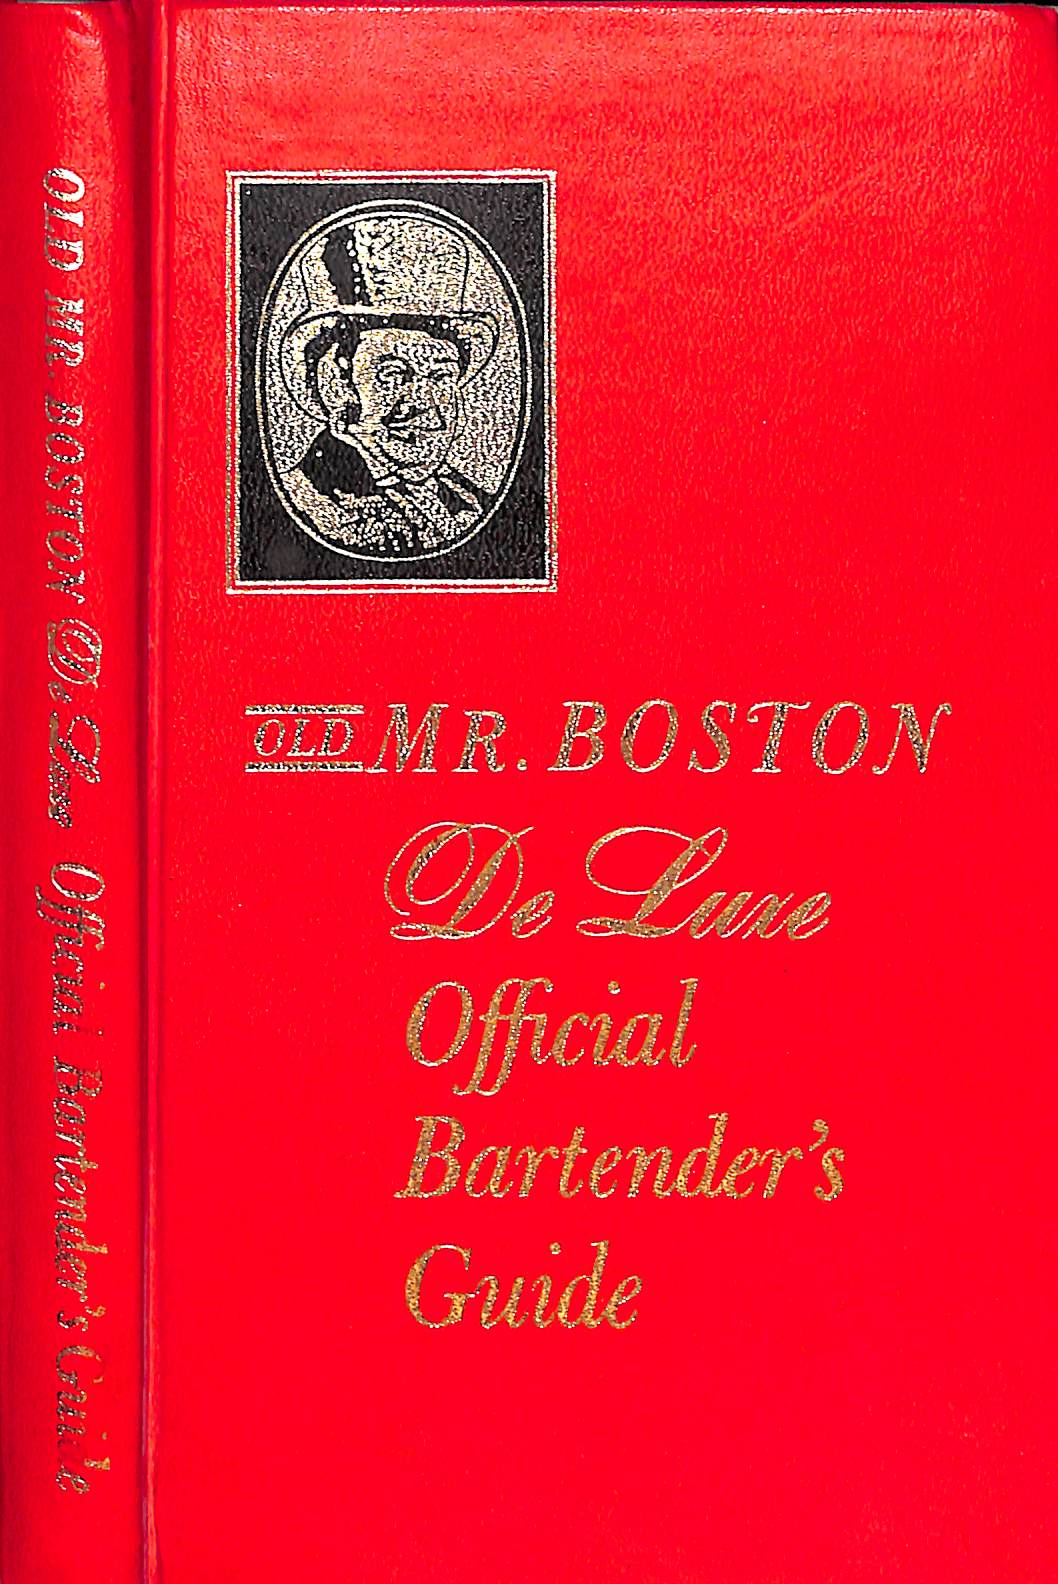 "Old Mr. Boston De Luxe Official Bartender's Guide" 1968 COTTON, Leo [compiled and edited by] (SOLD)